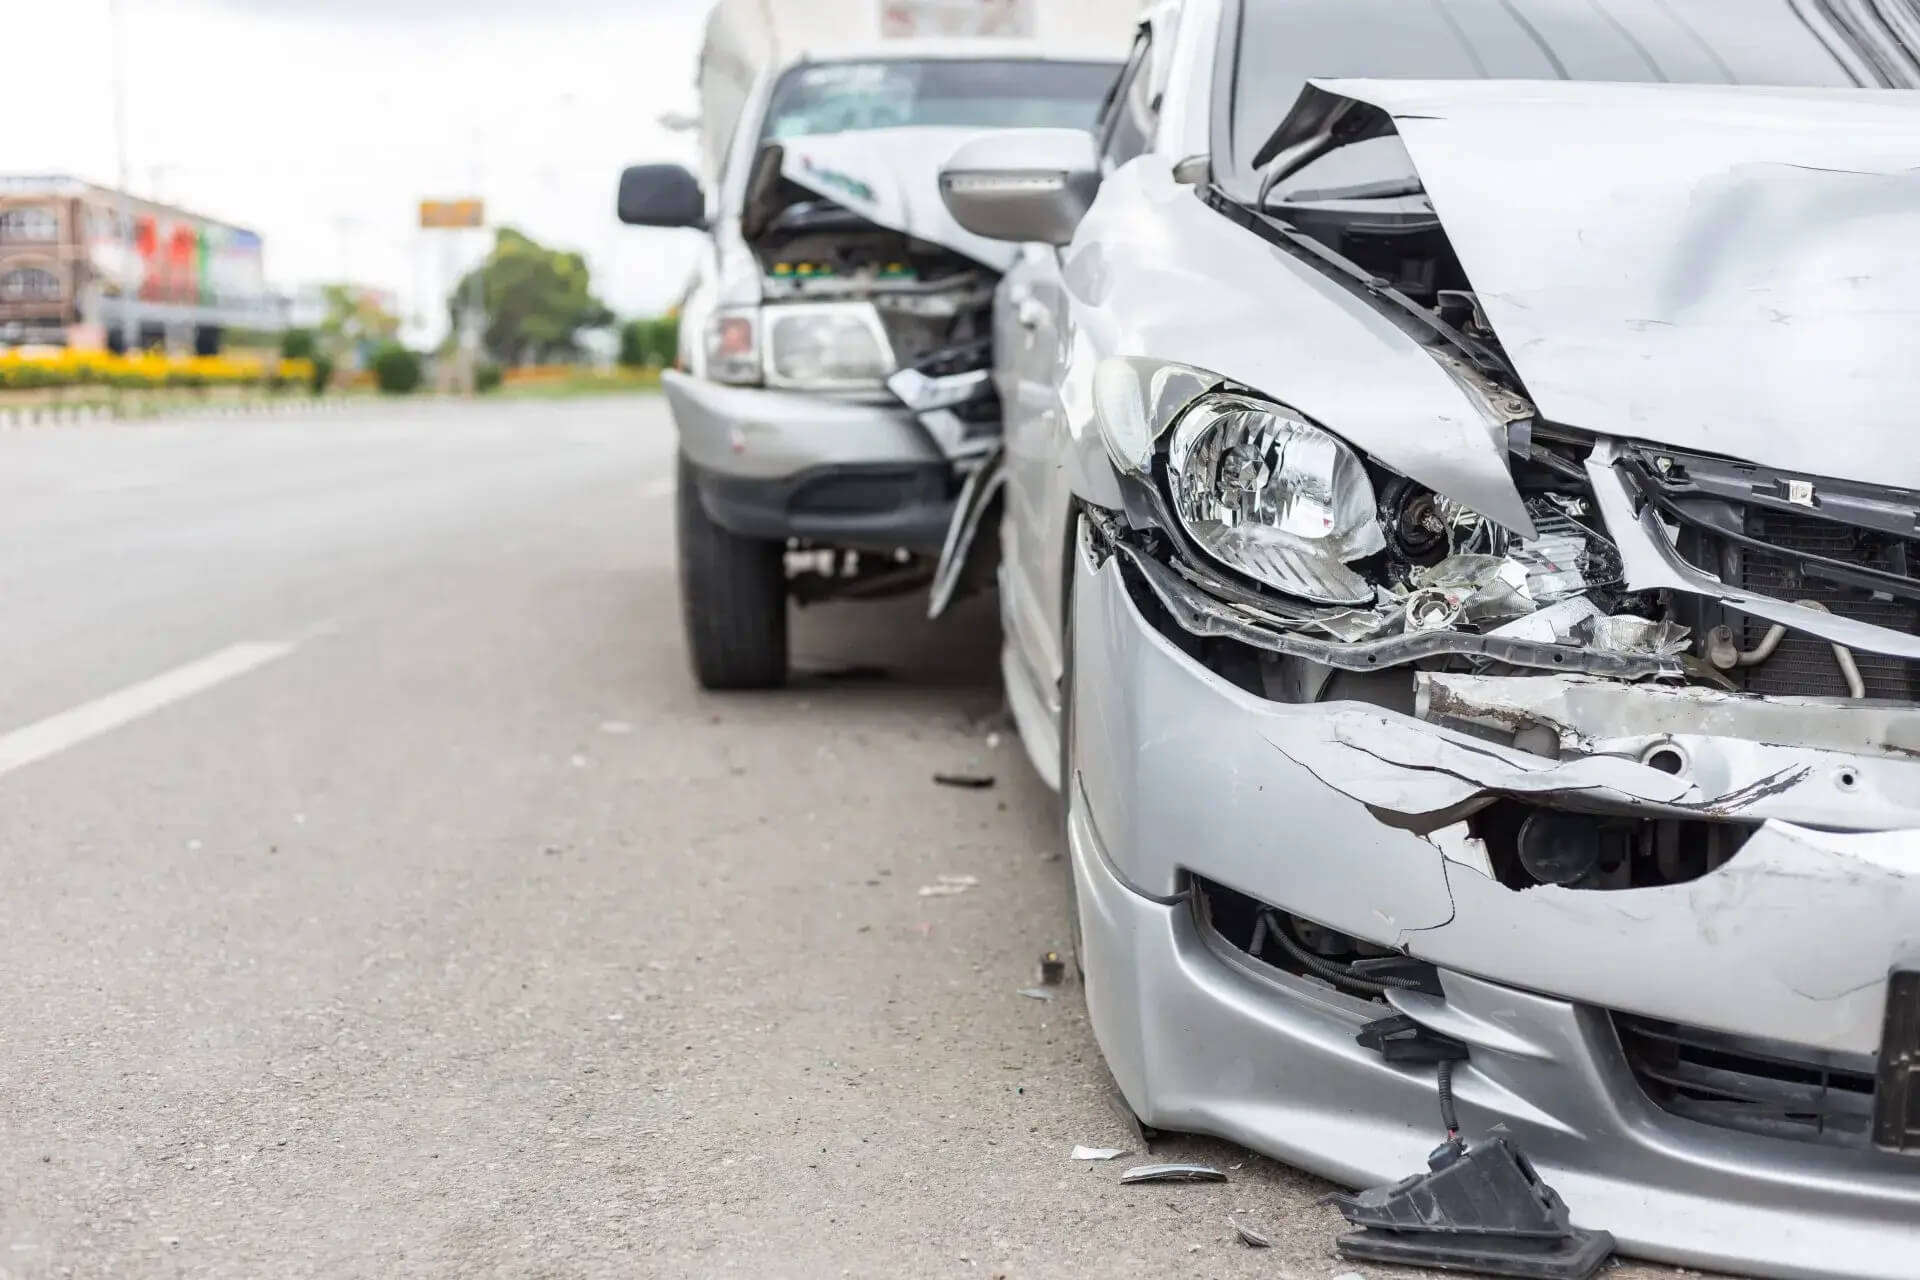 How Do I Seek Compensation For An Auto Accident?